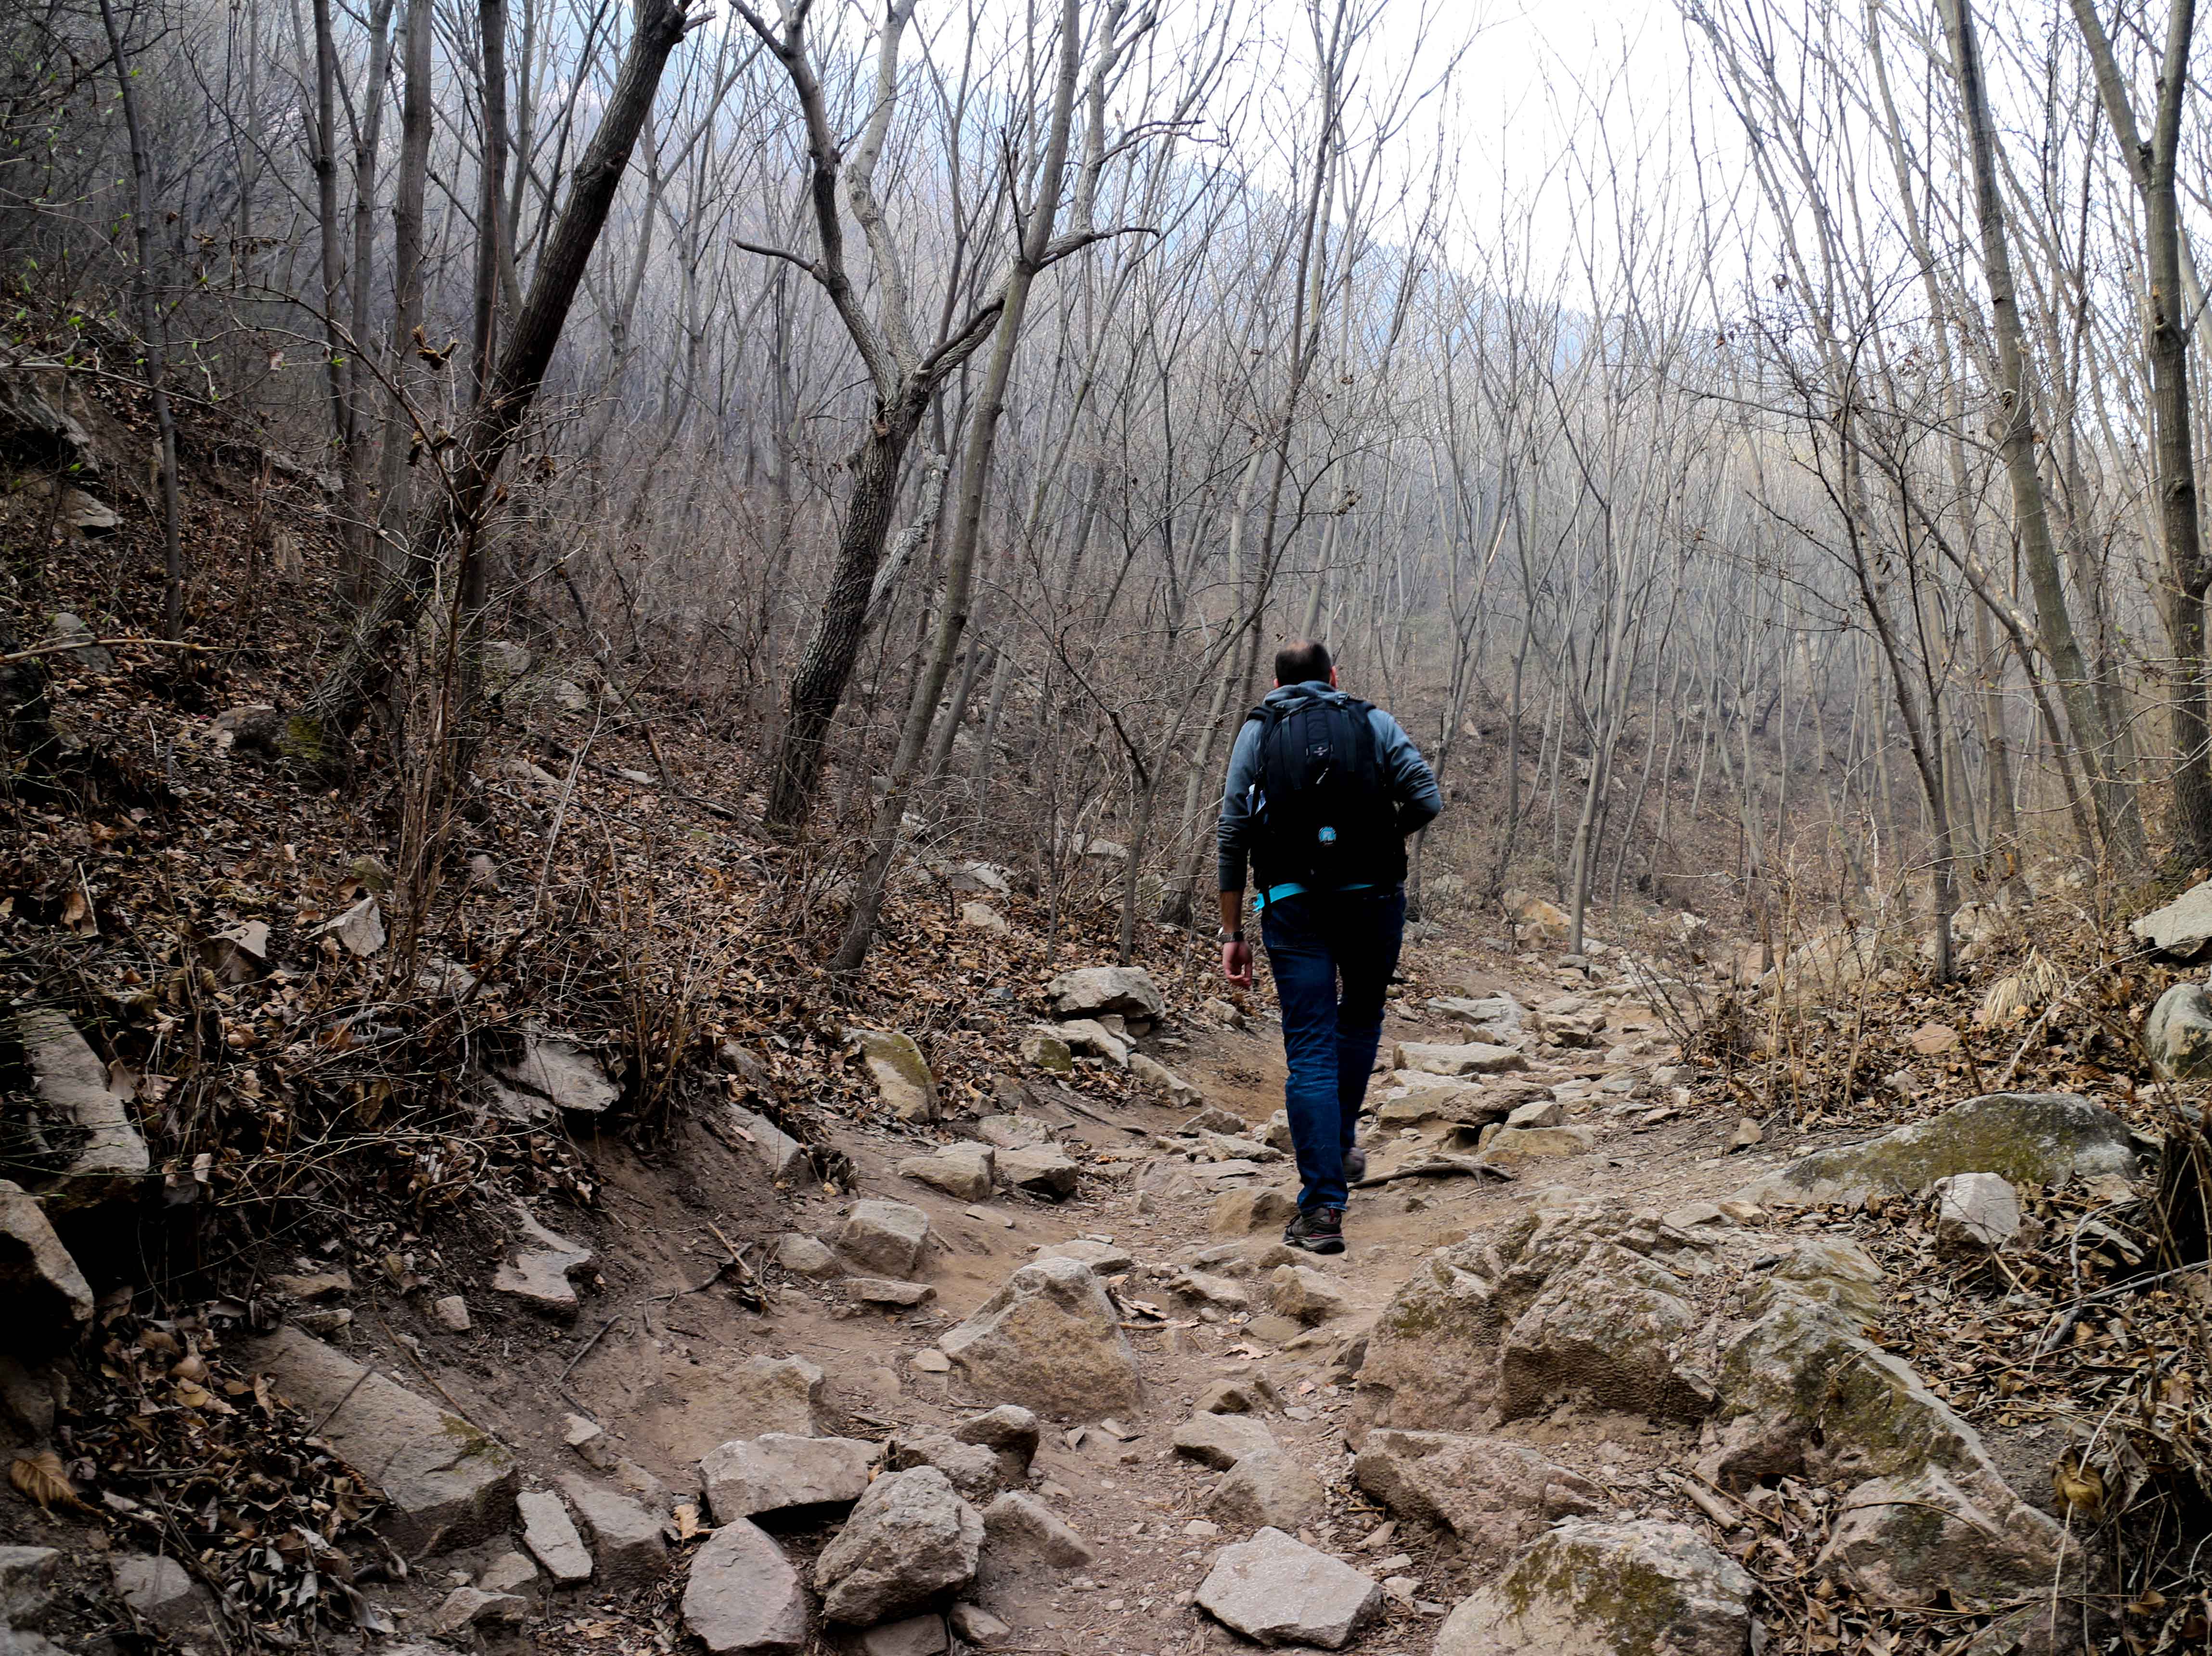 Commune by the Great Wall, hiking to the Great Wall